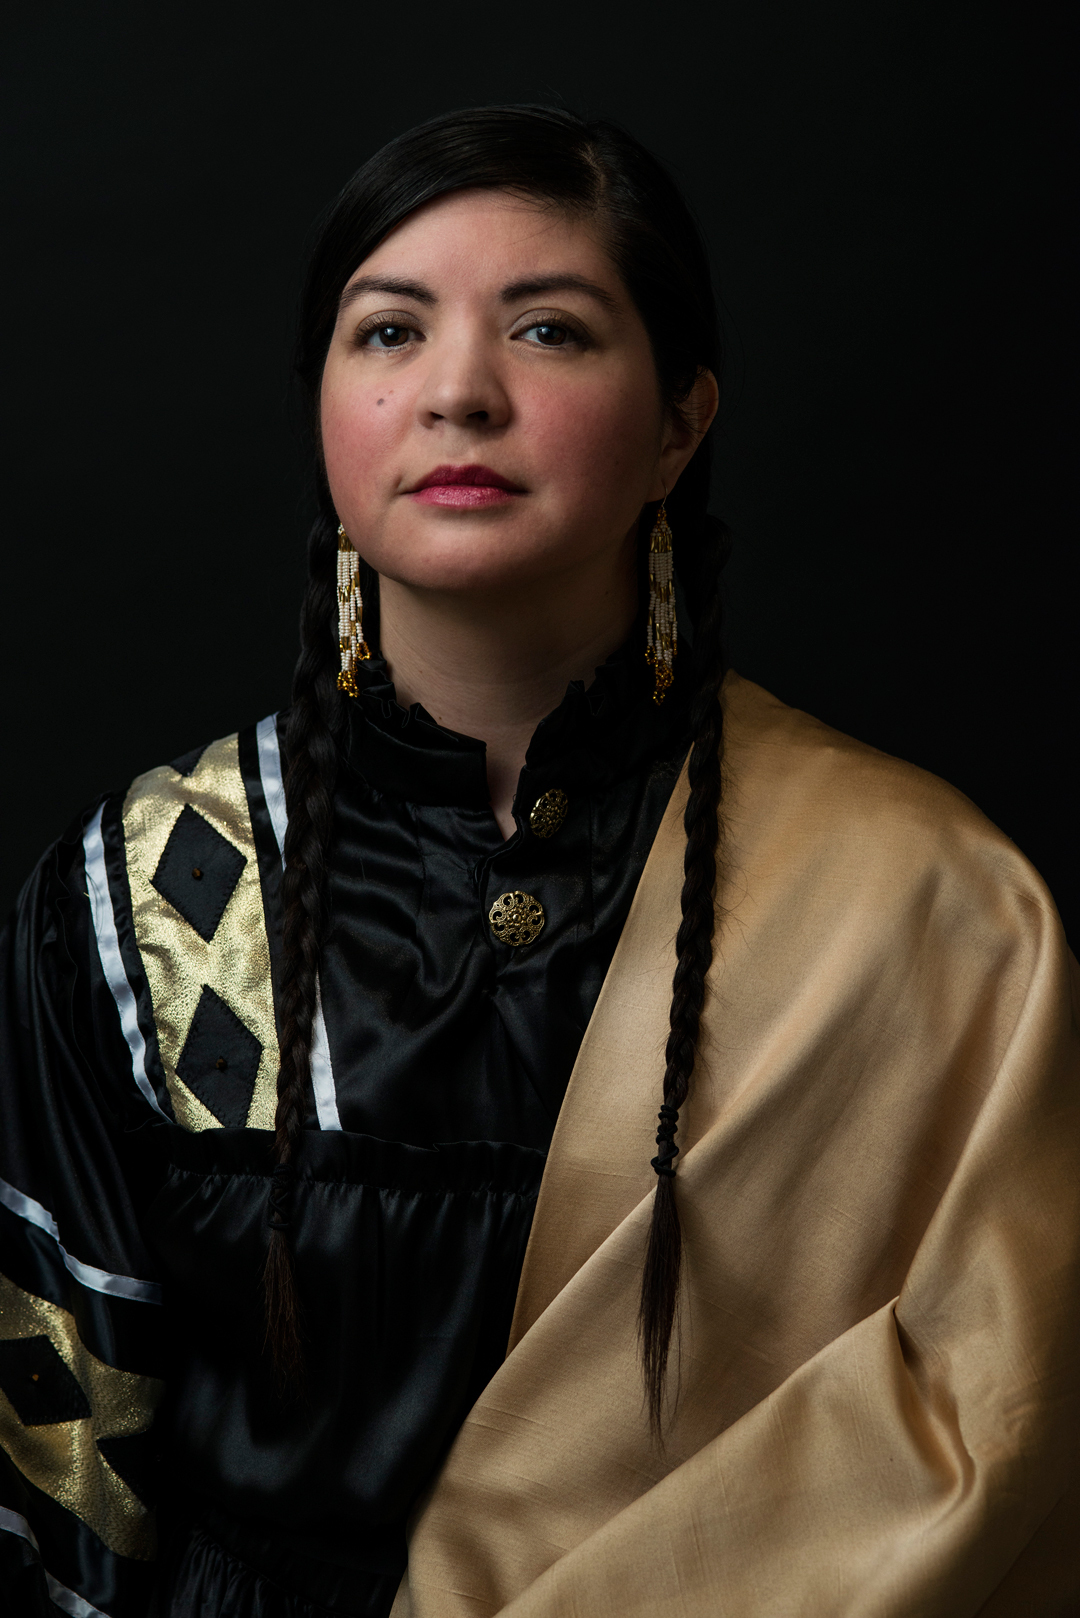 A woman dressed in black and gold Indigenous regalia with a long braid and red lip sits against a black background looking at the camera